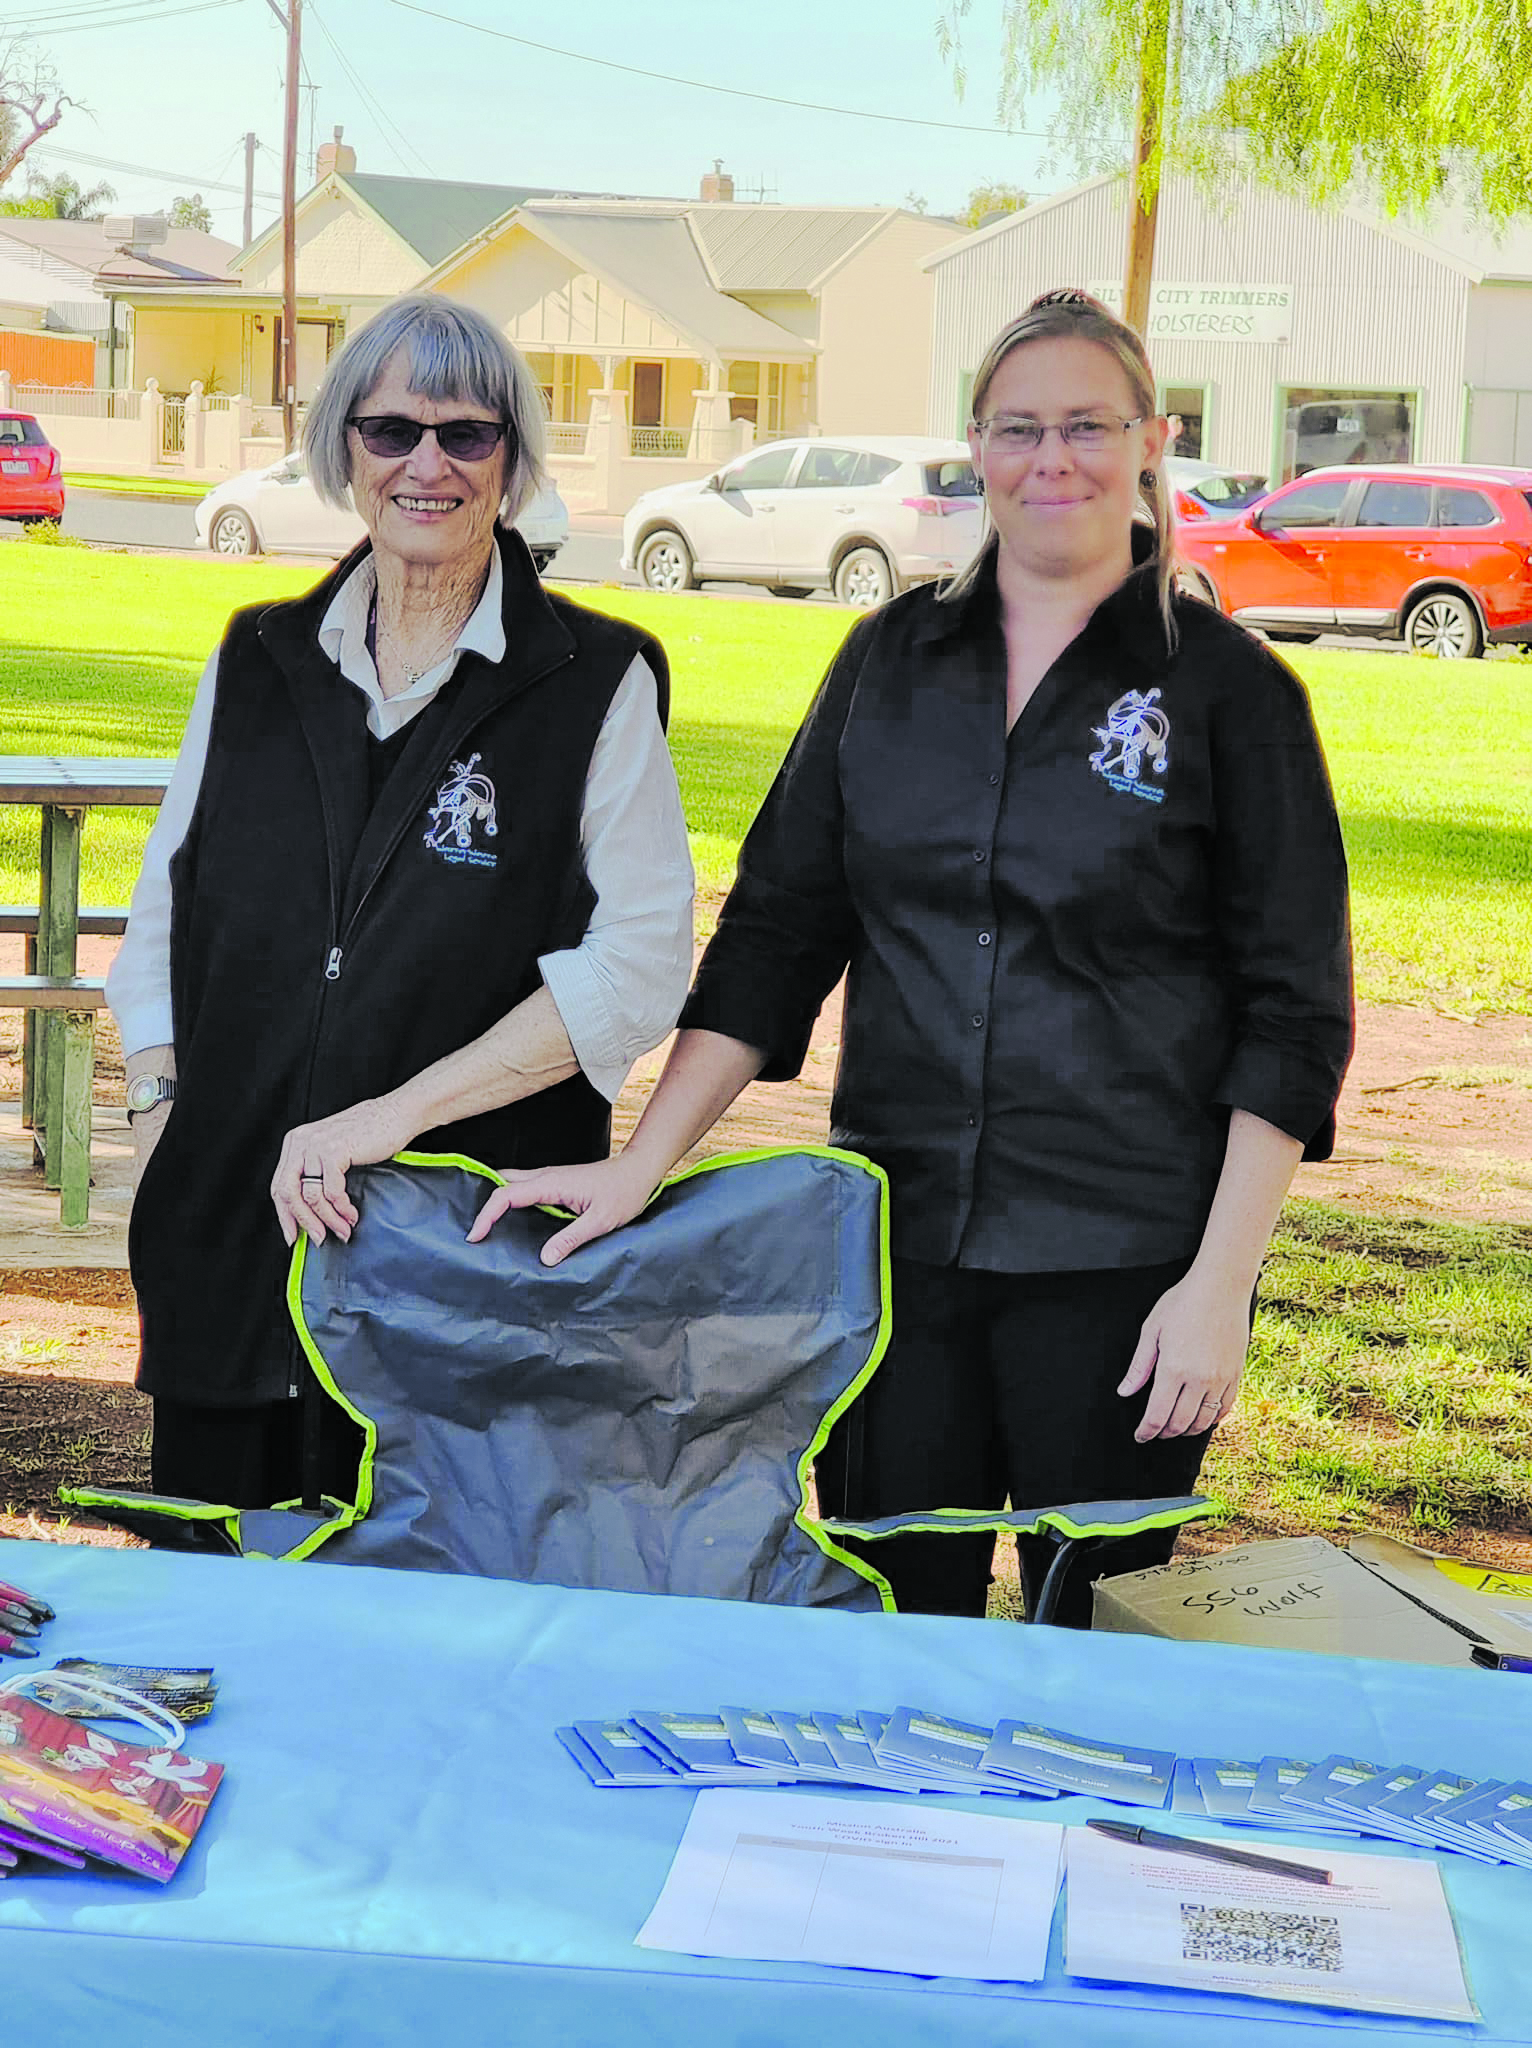 Warra Warra Legal Service at one of their community Outreach programs. Picture: Supplied